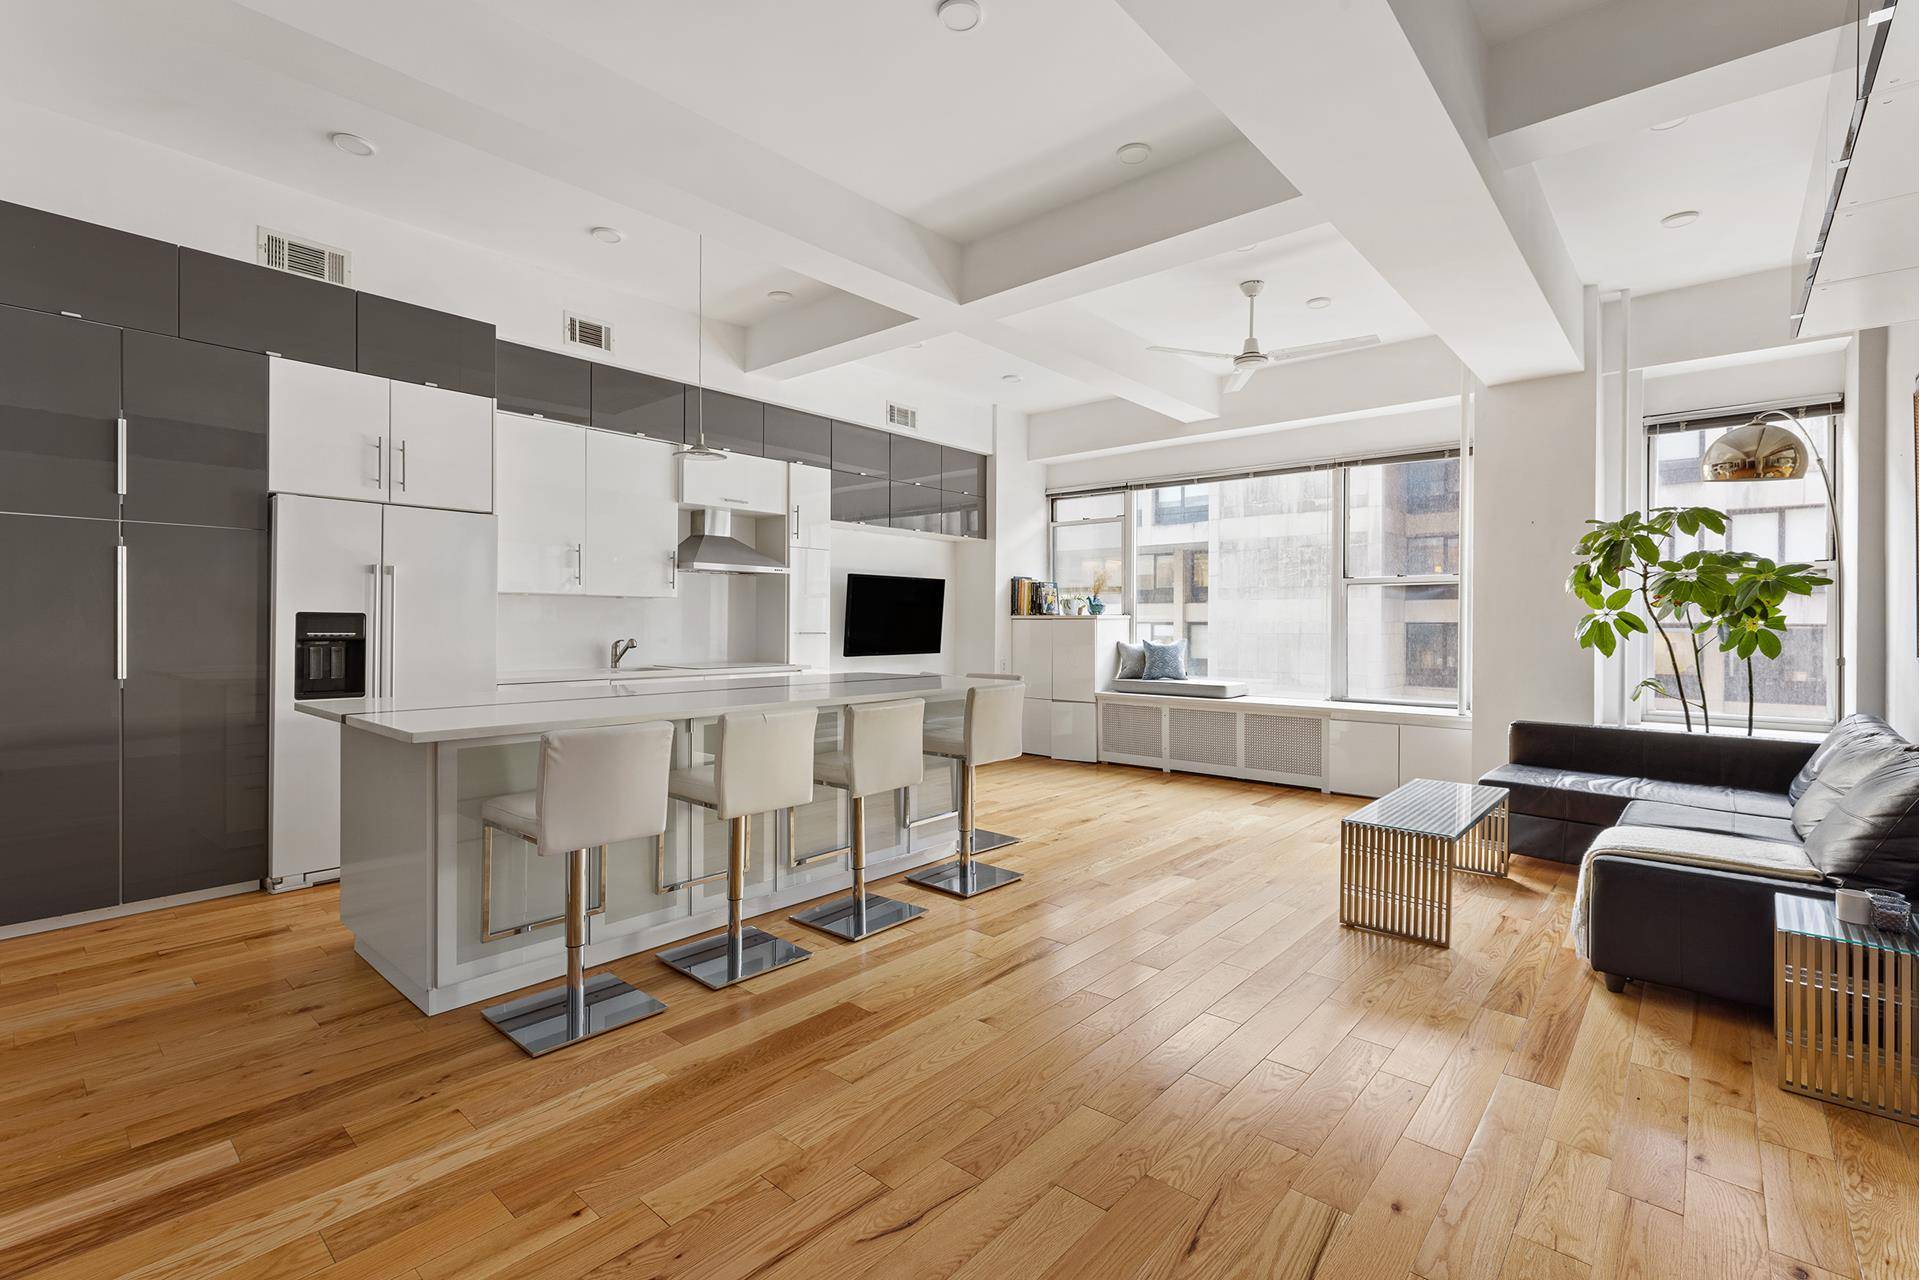 Introducing Residence 3D at 315 Seventh Avenue, a meticulously renovated 1, 000 sqft loft nestled within one of Chelsea's iconic art deco buildings.